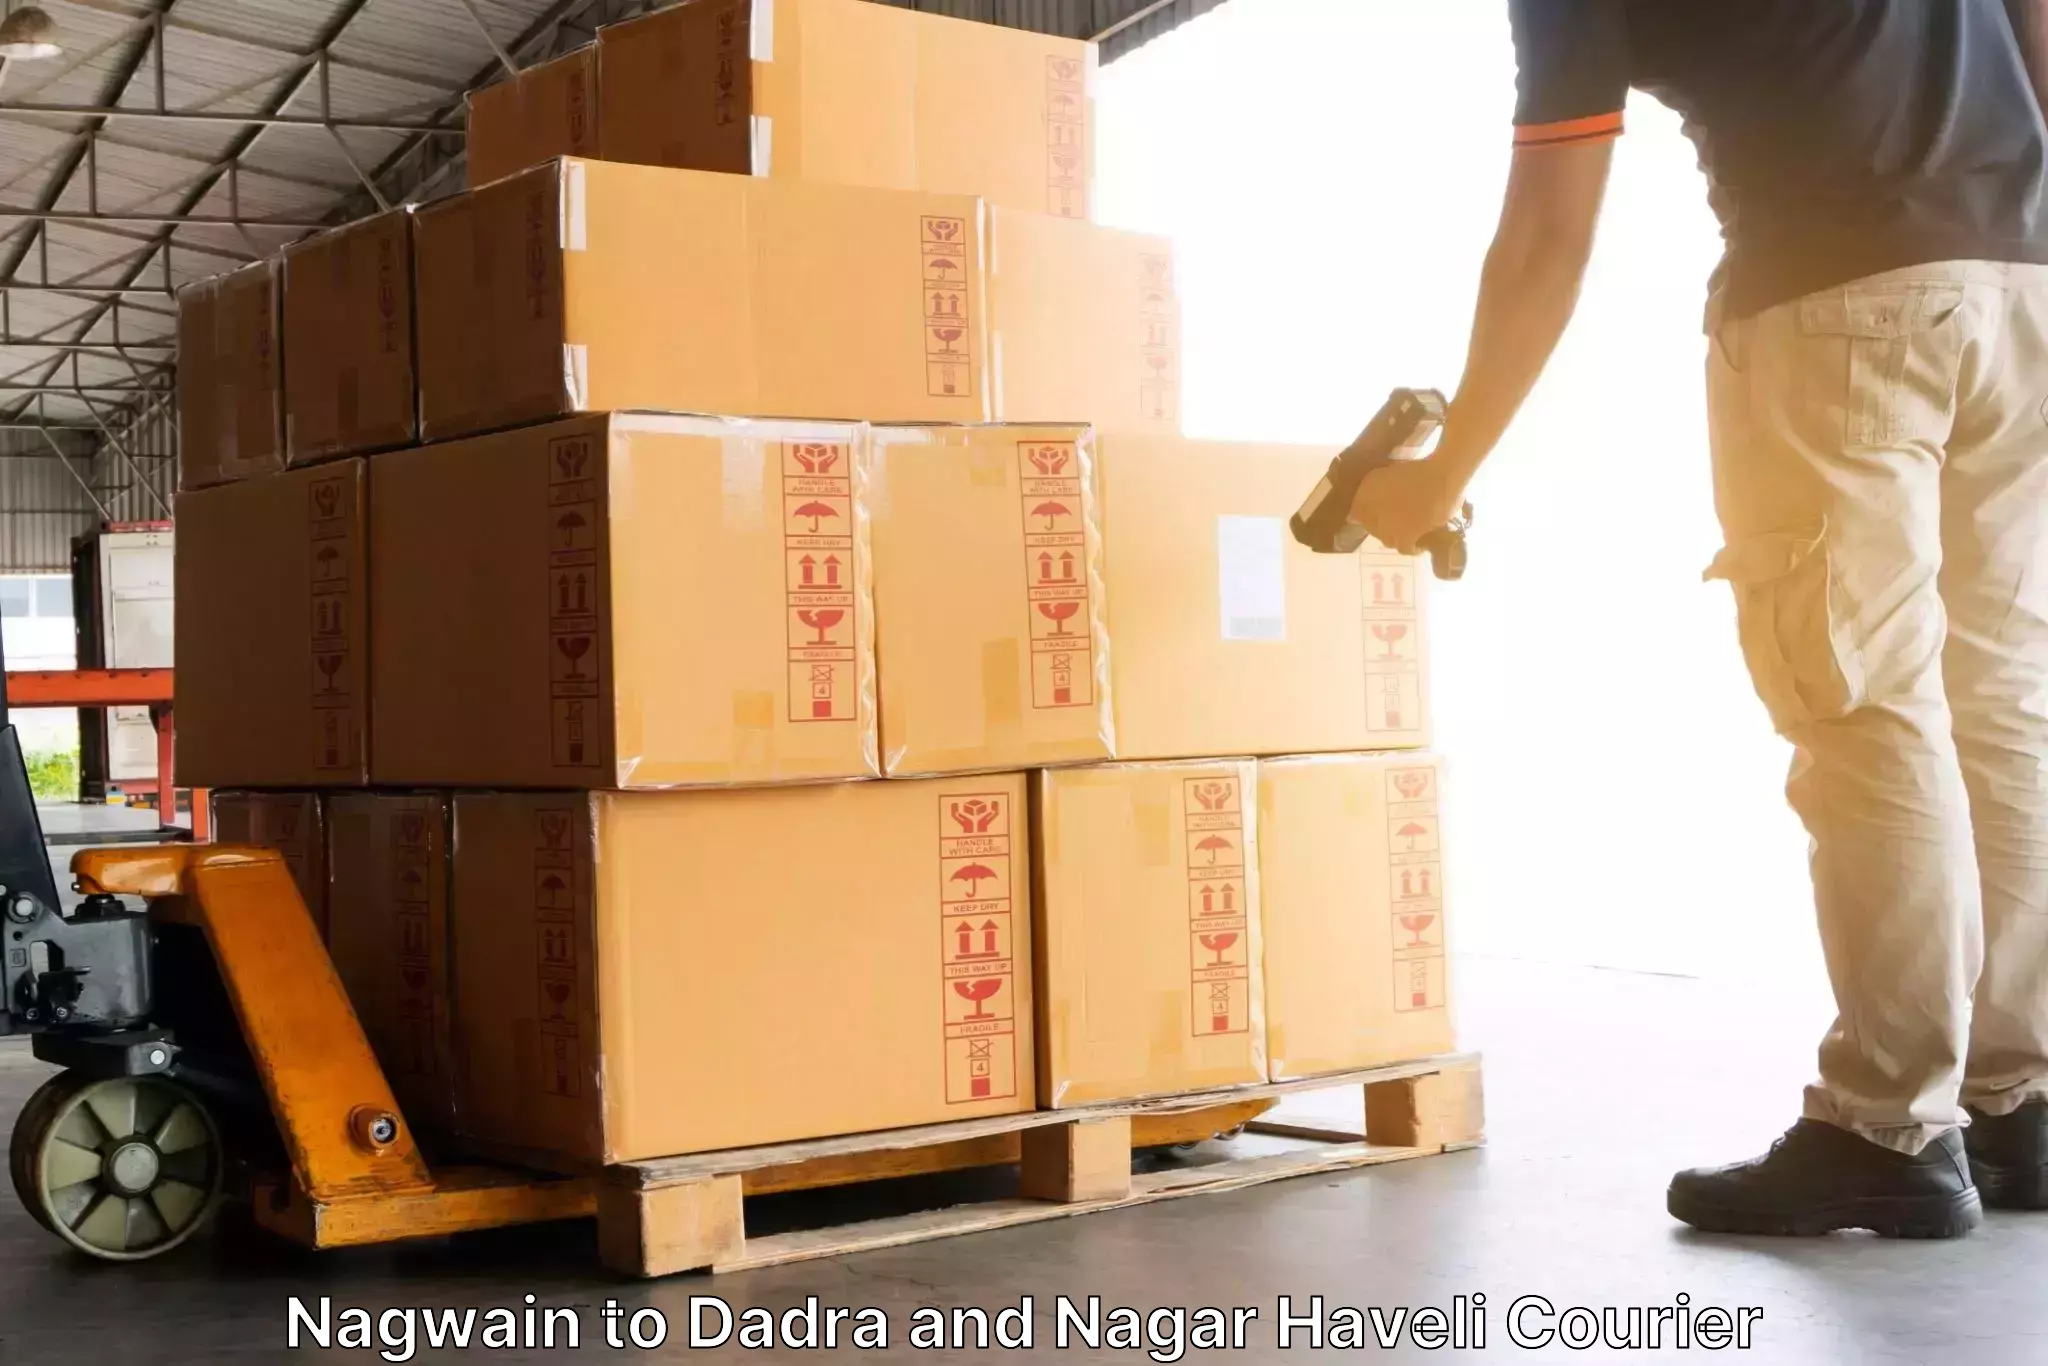 Professional parcel services in Nagwain to Dadra and Nagar Haveli